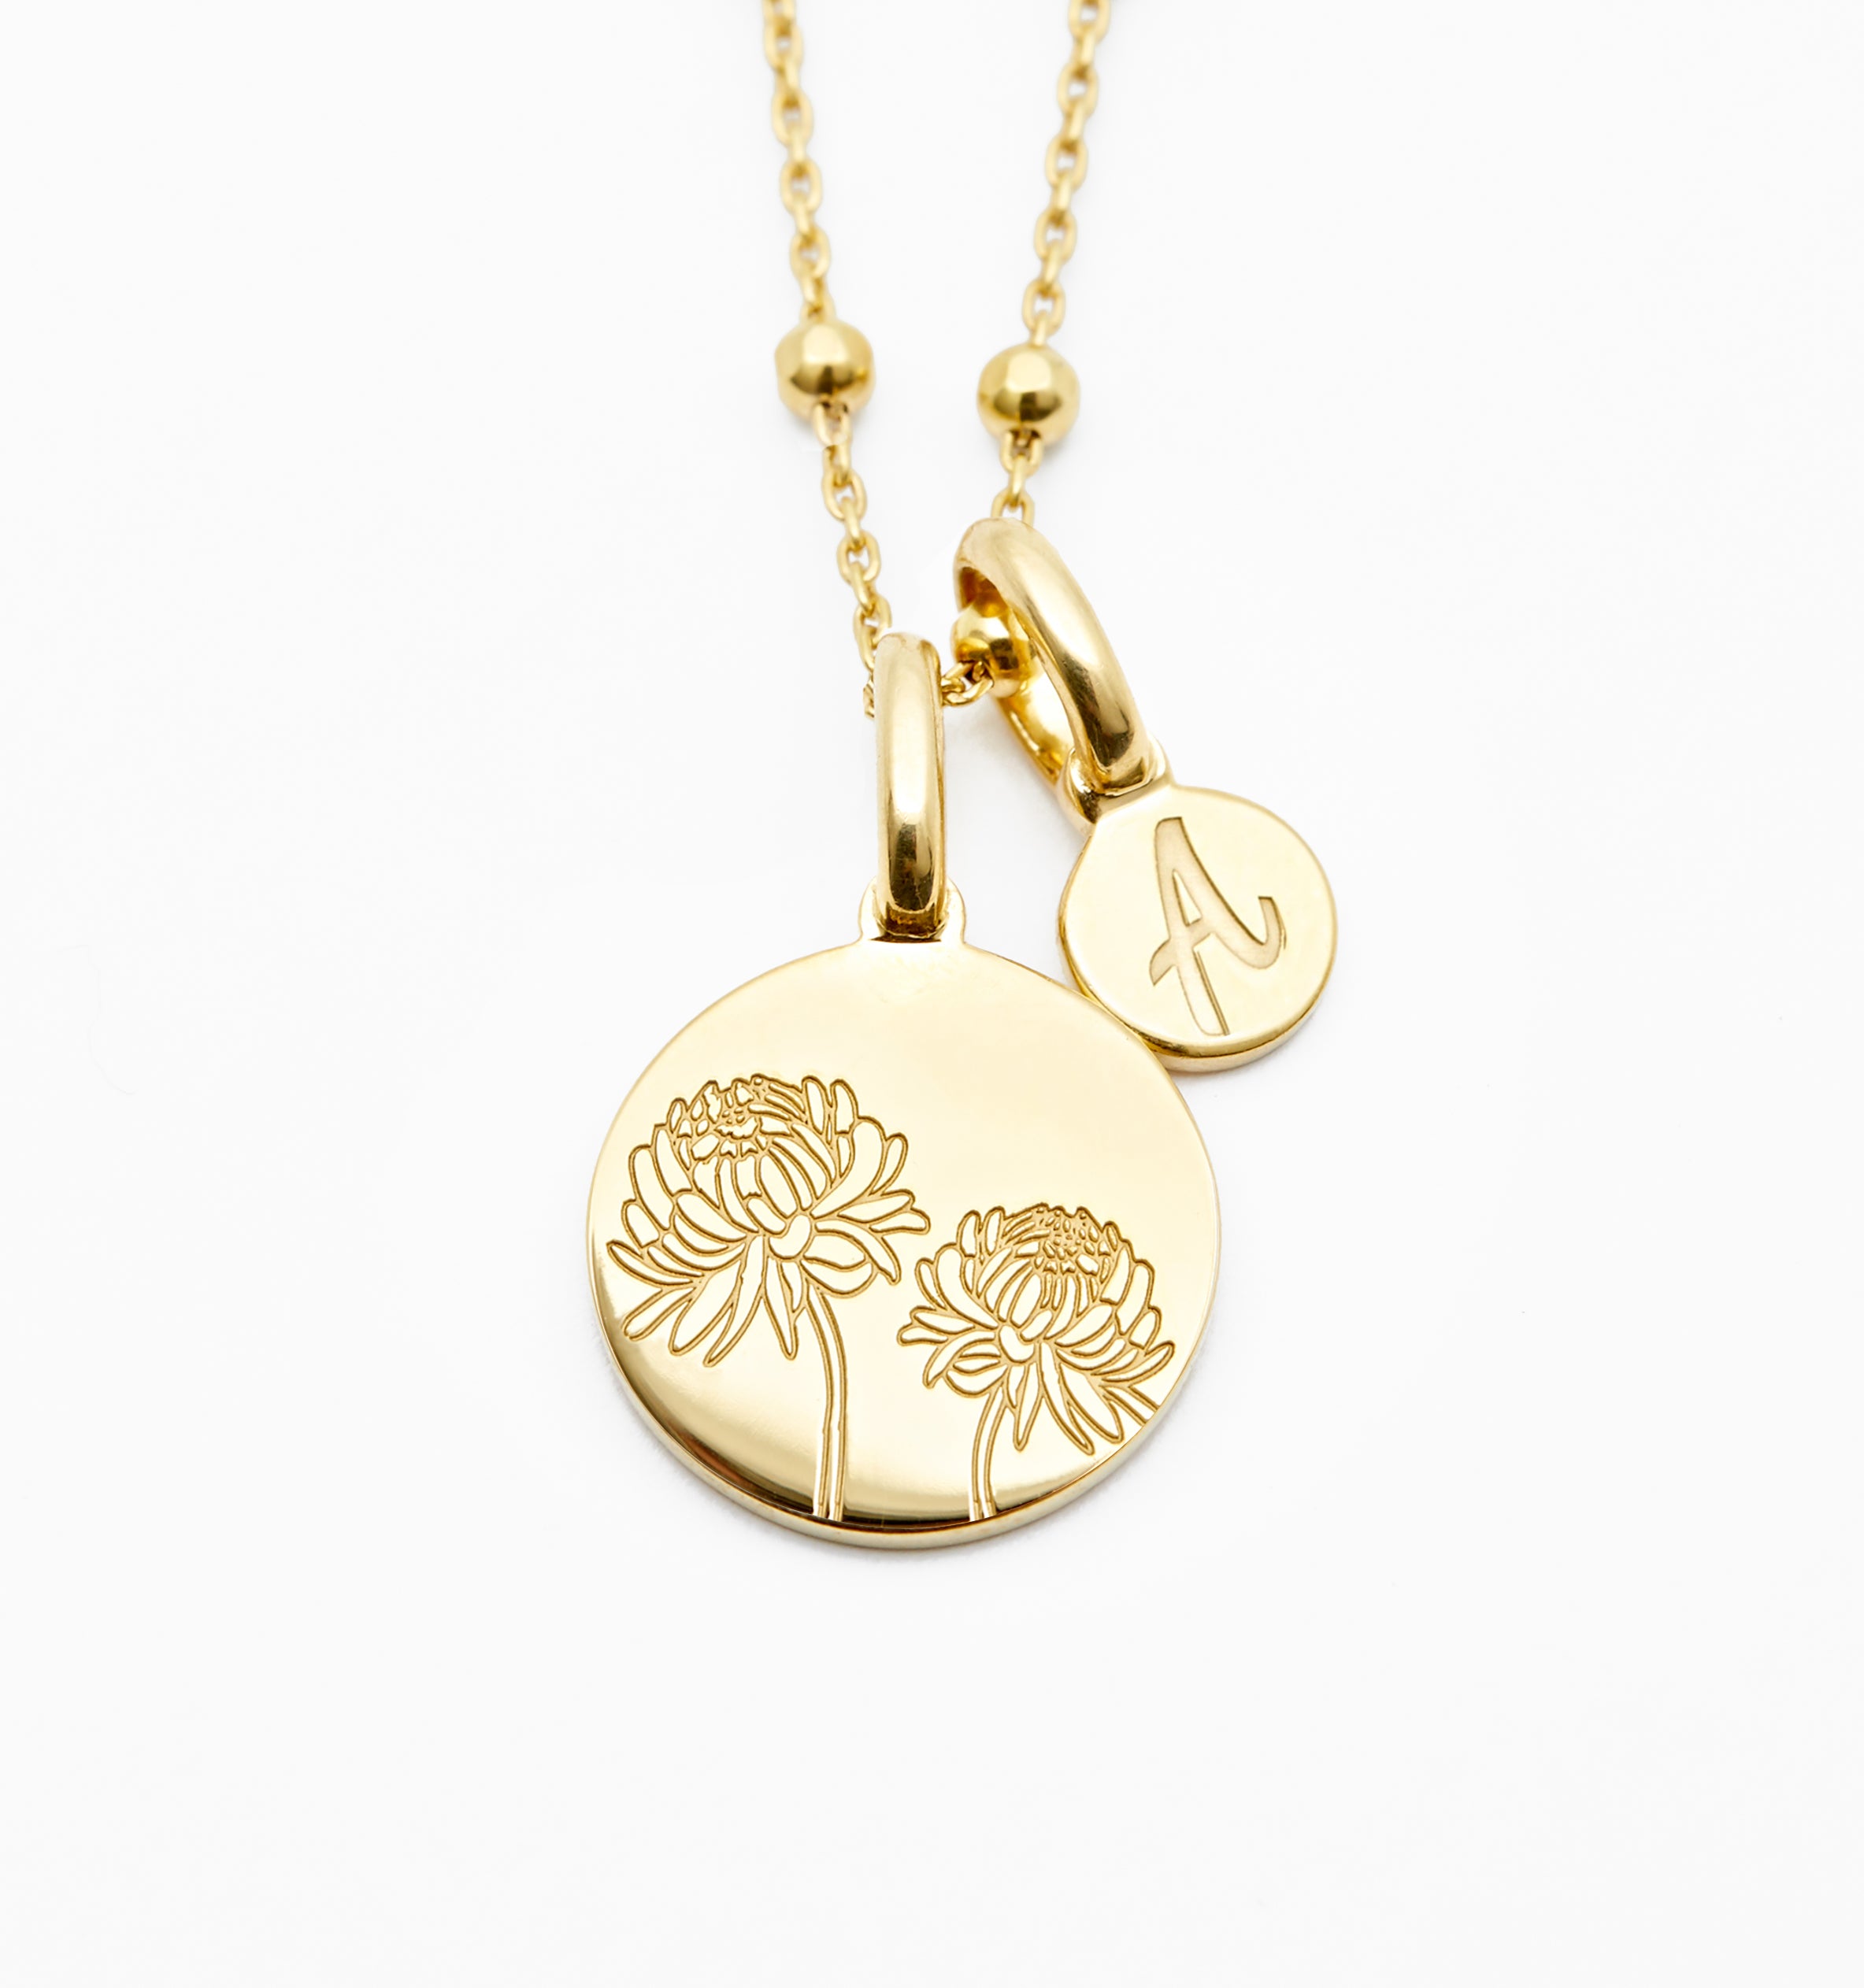 Chrysanthemum Necklace With Initial - November Flower